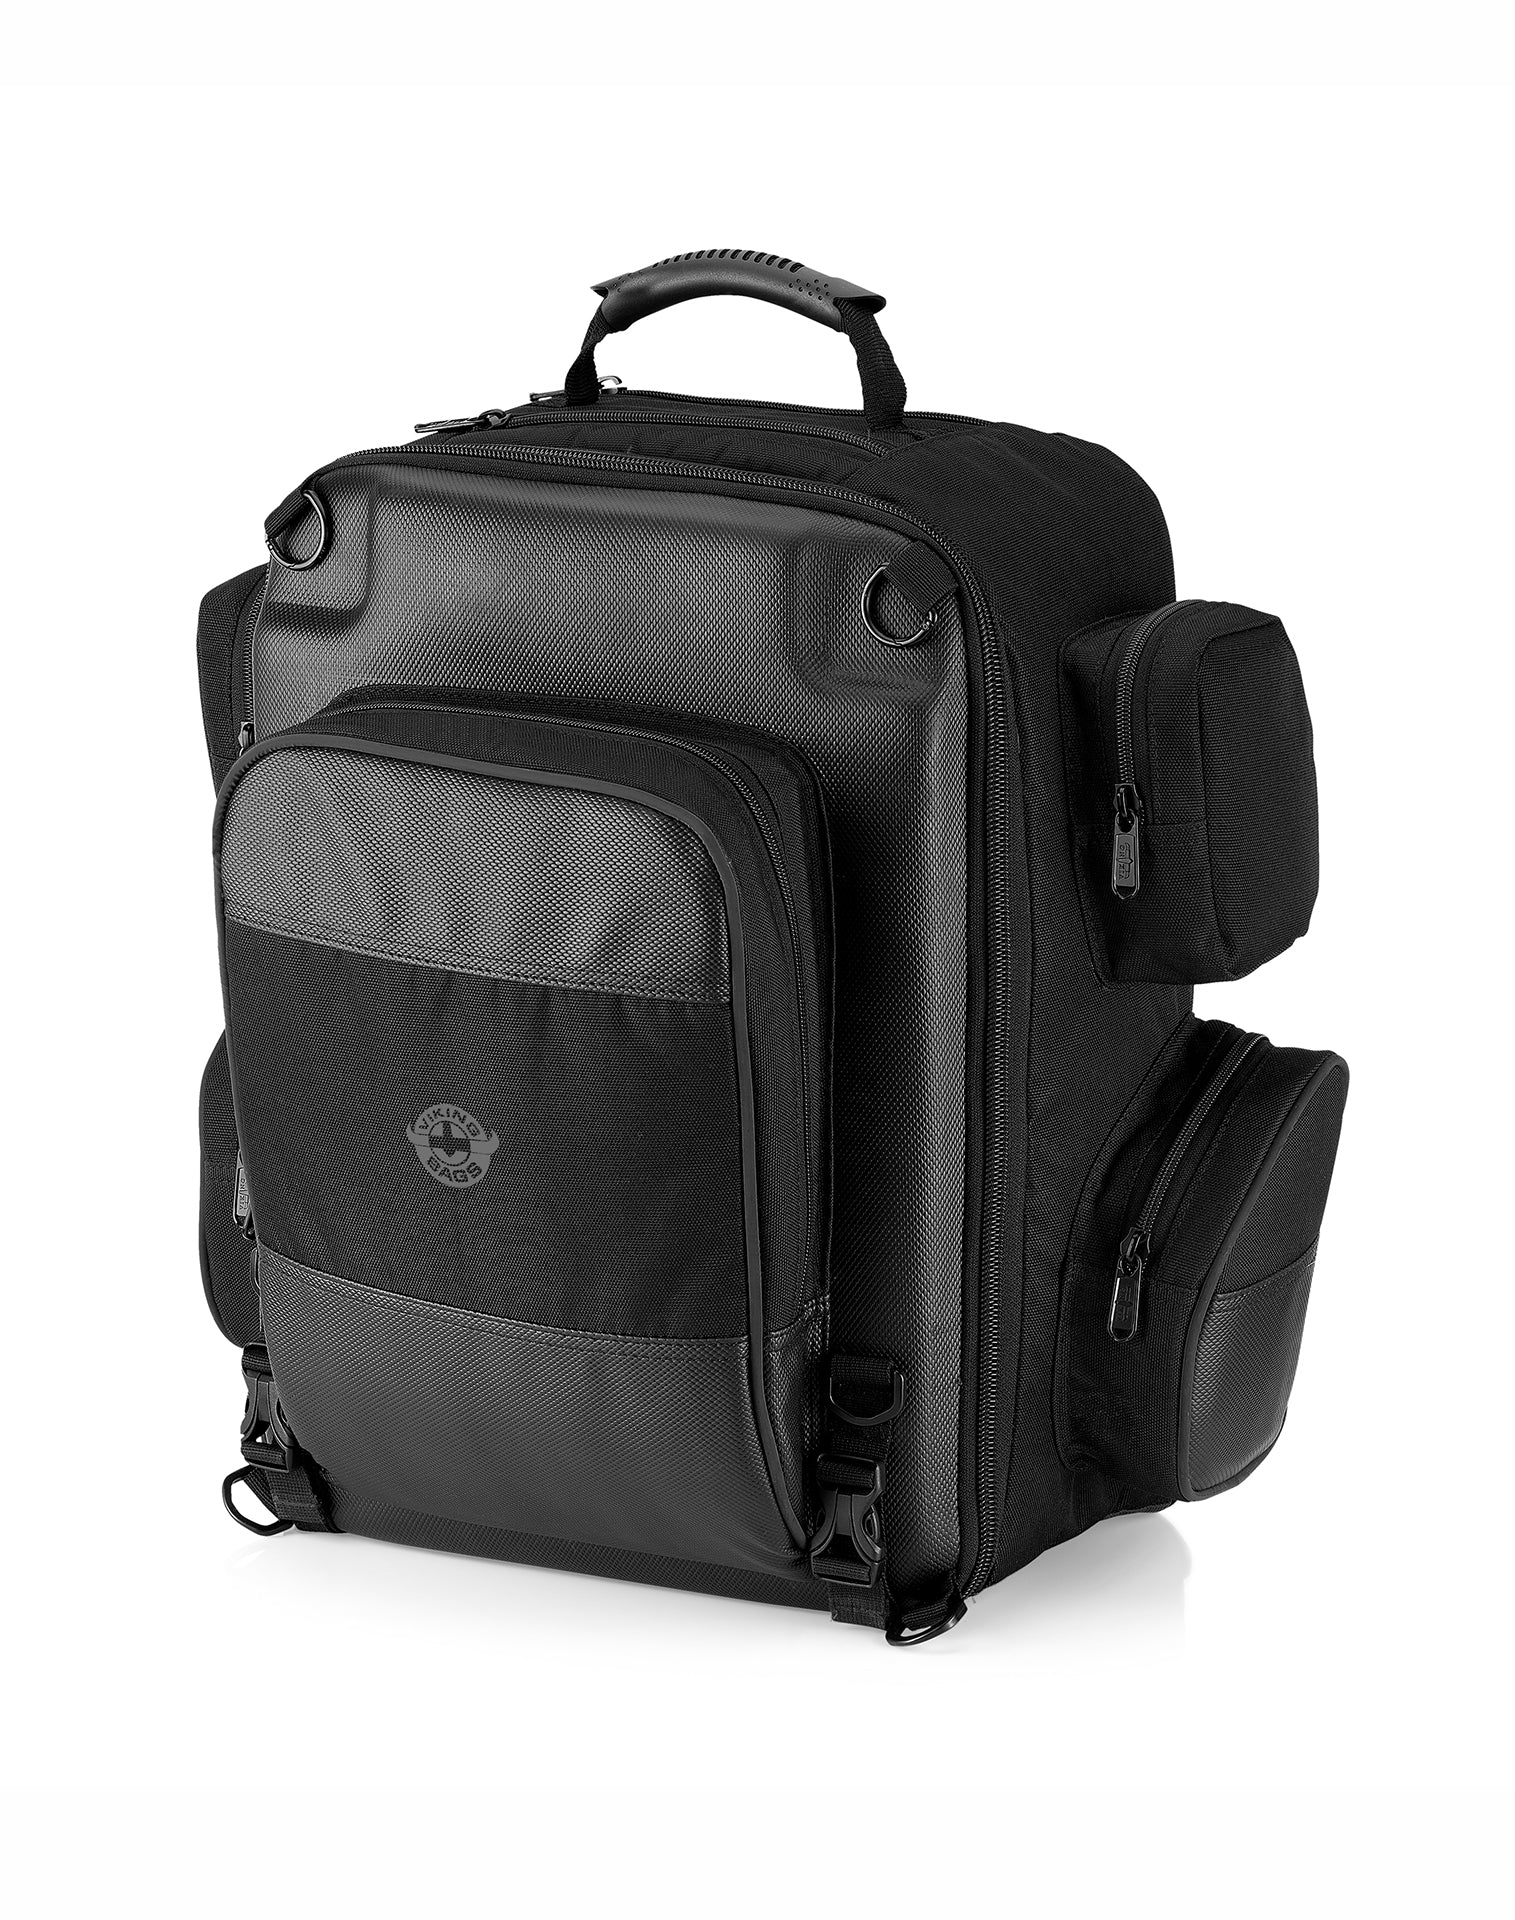 30L - Voyage Large Triumph Motorcycle Backpack